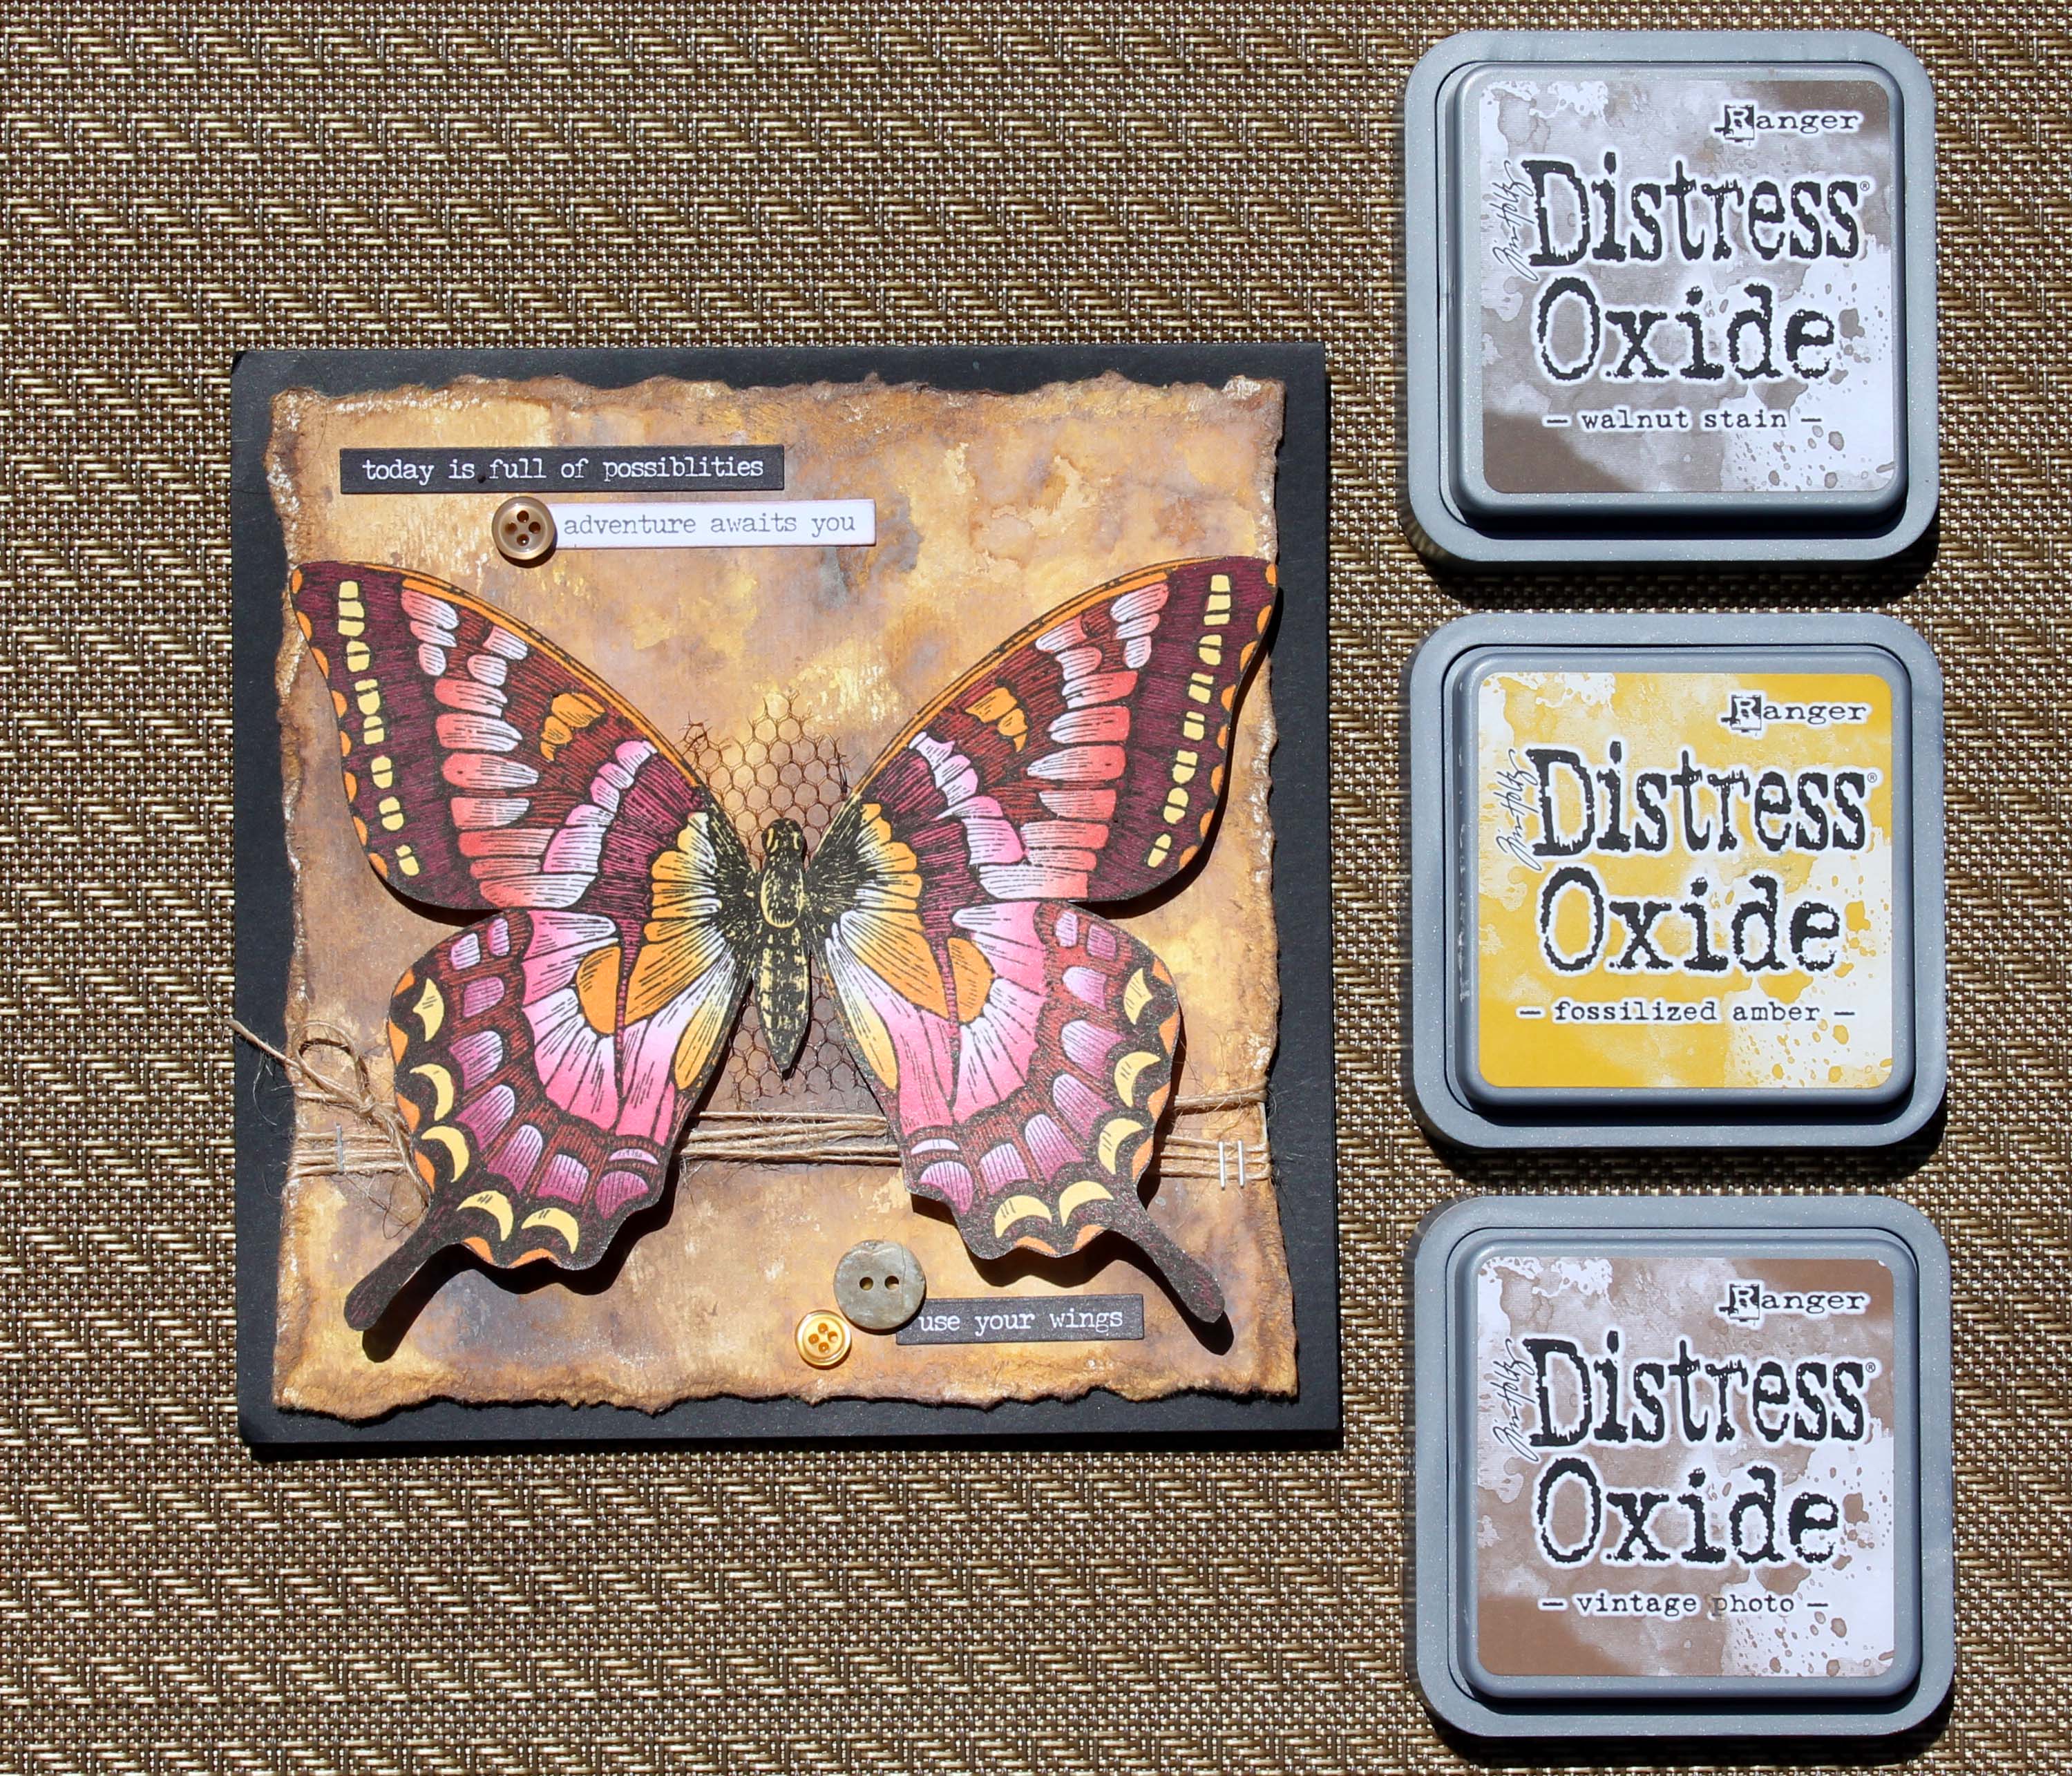 @csmscrapbooker Handmade butterfly card stamped with Ranger ink using a butterfly stamp from Stampin Up. Background created using Ranger Distress Oxide inks.